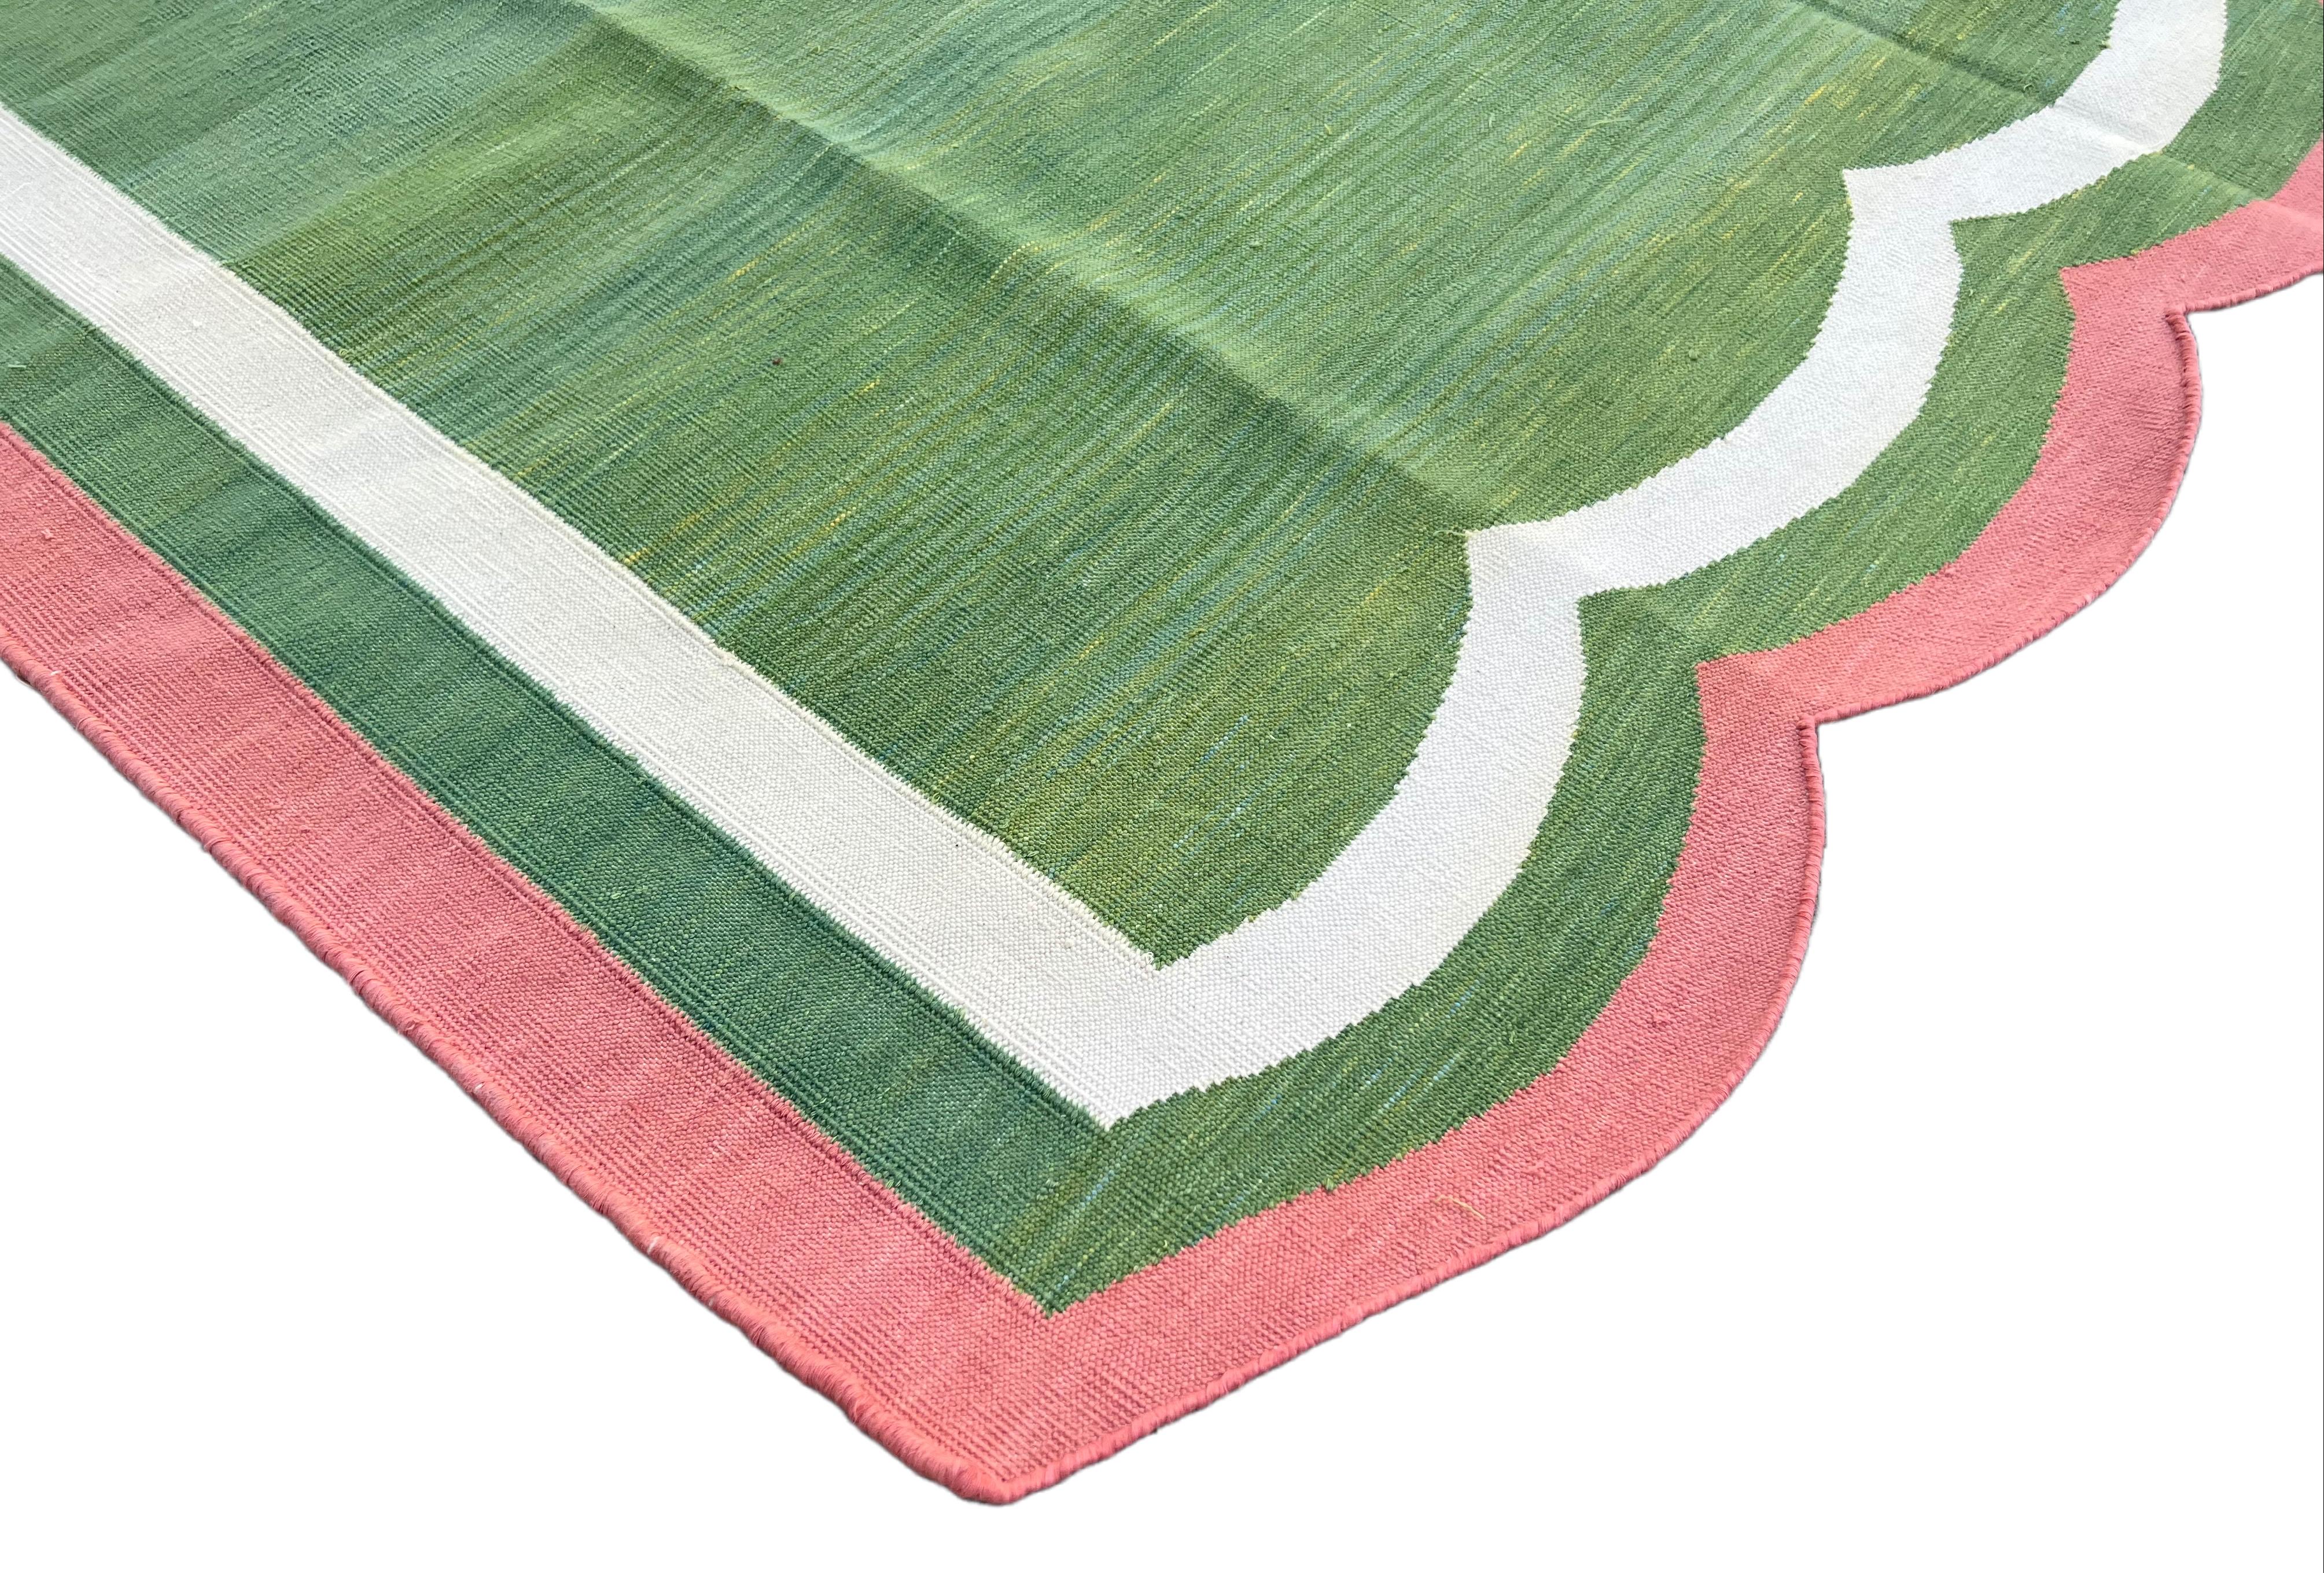 Mid-Century Modern Handmade Cotton Area Flat Weave Rug, 5x8 Green And Pink Scalloped Kilim Dhurrie For Sale